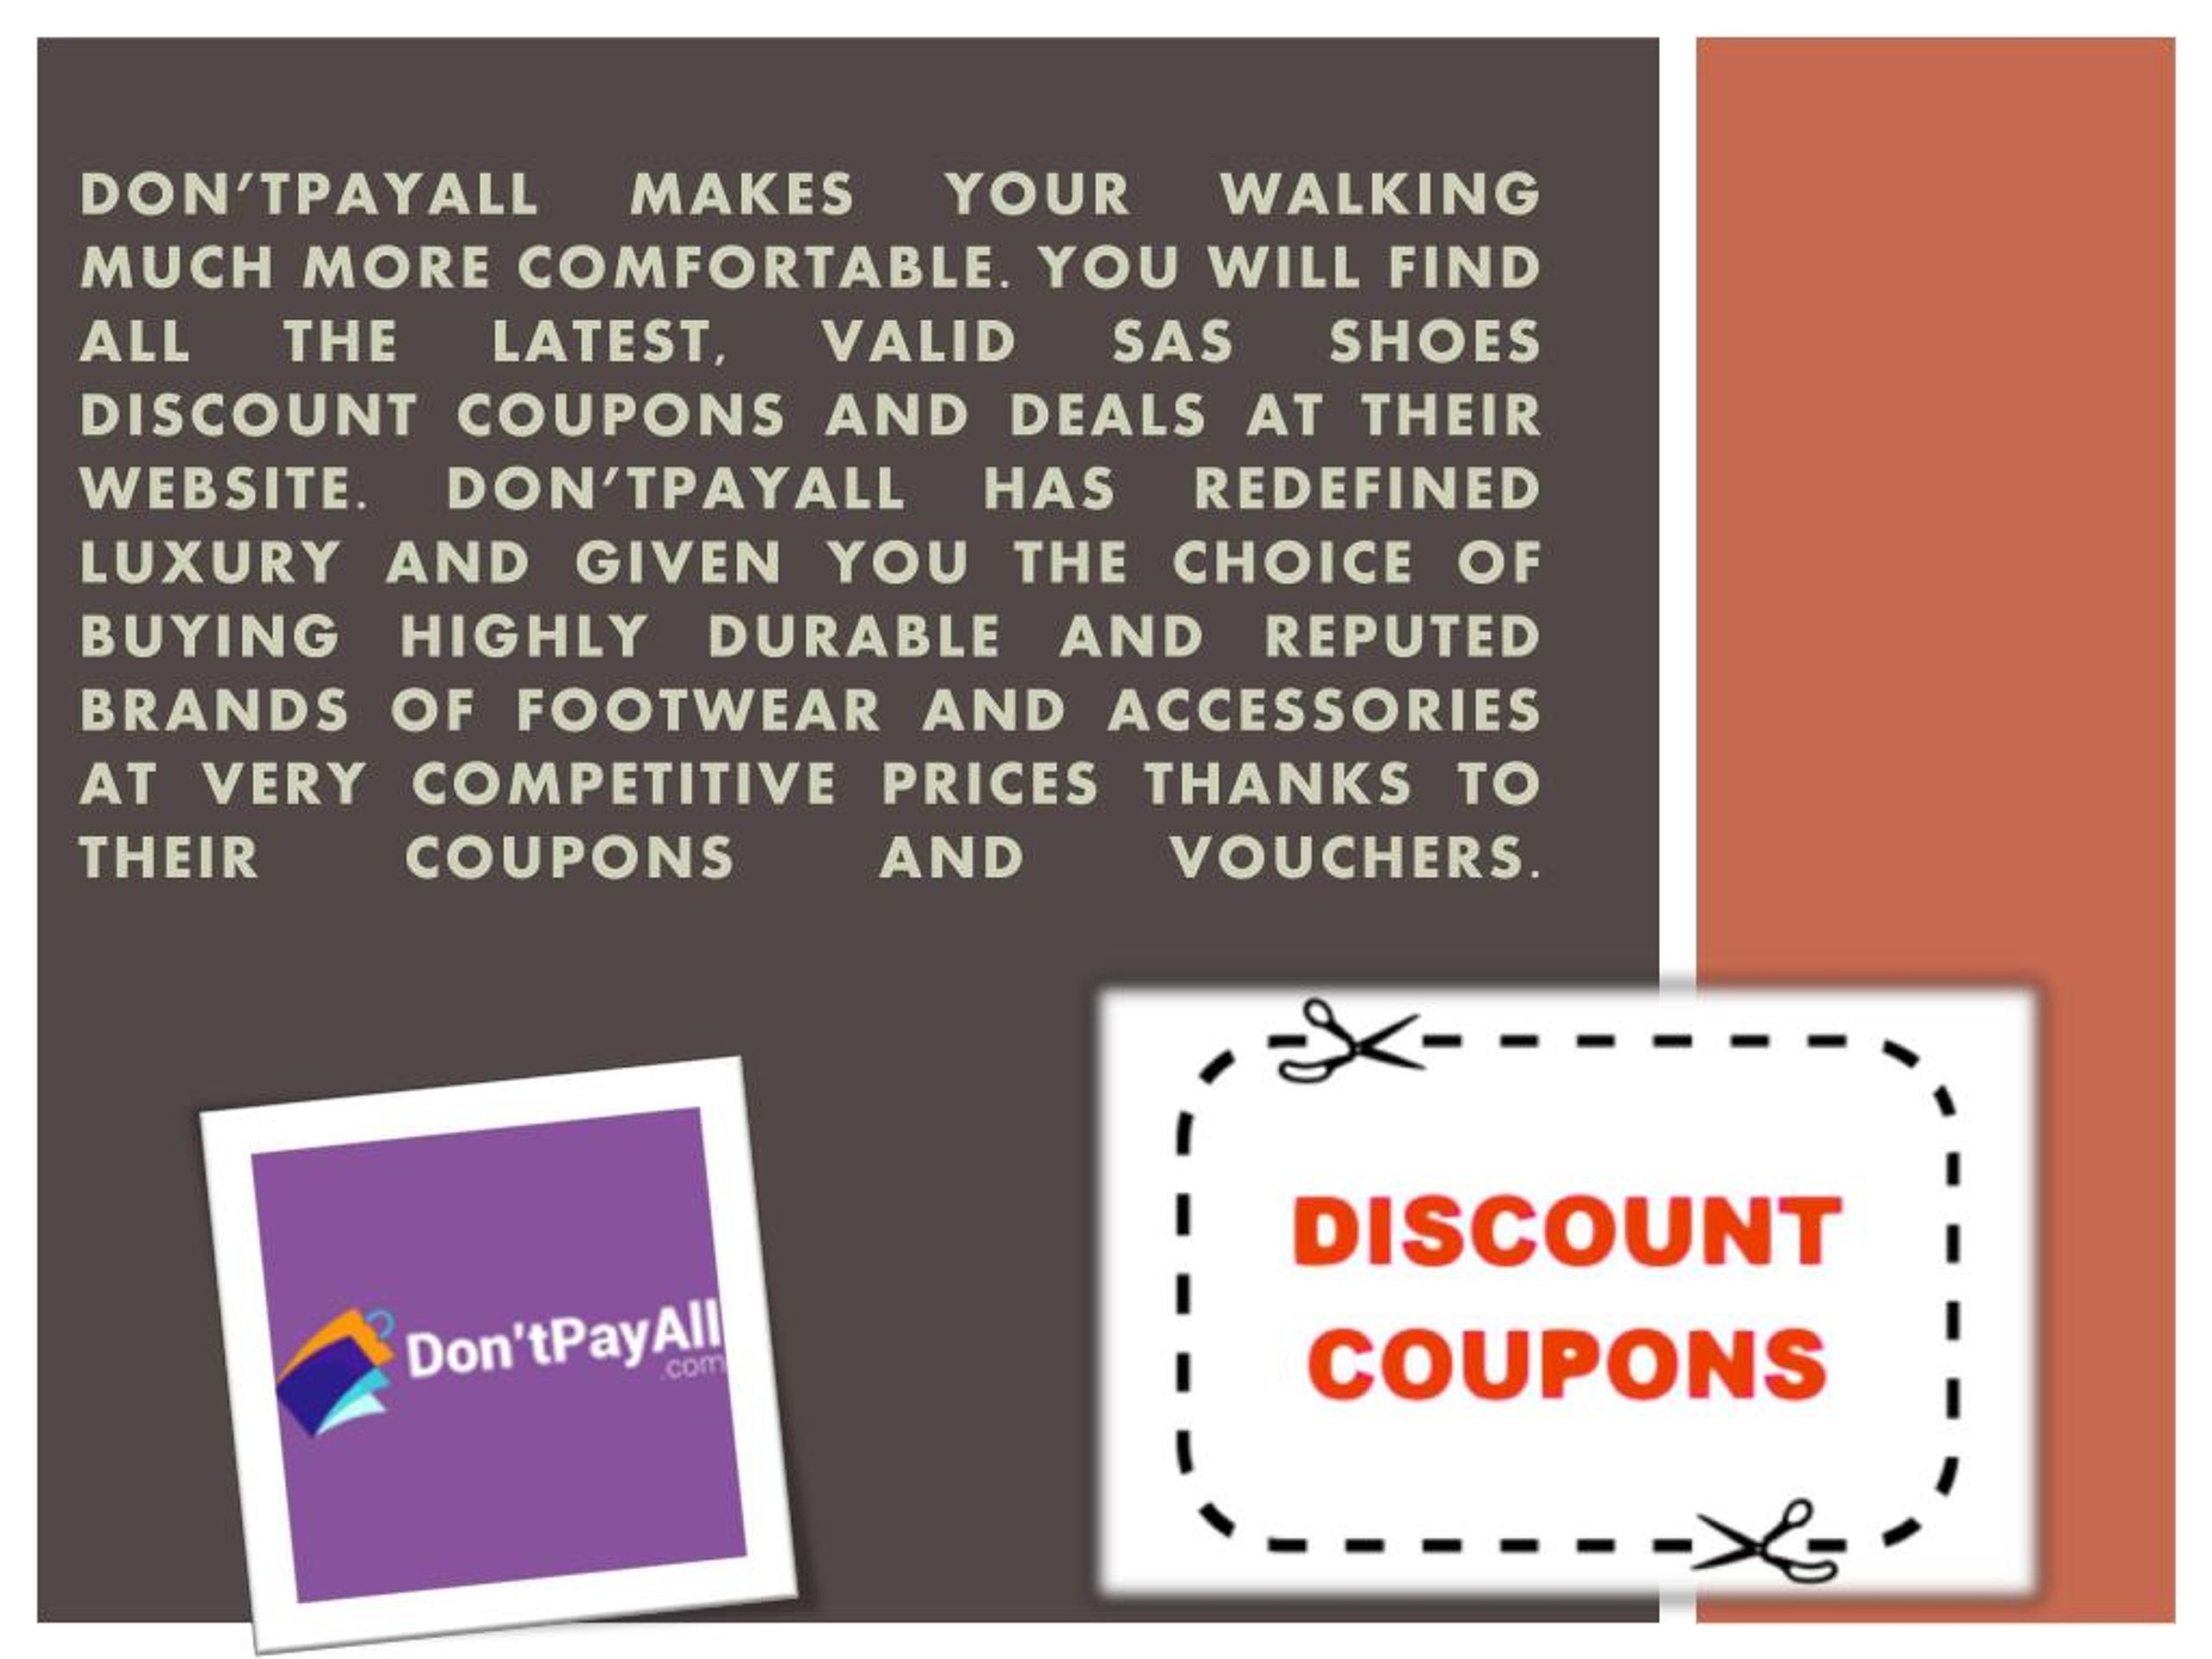 PPT SAS Shoes Discount Coupons and Deals Make Your Walking More